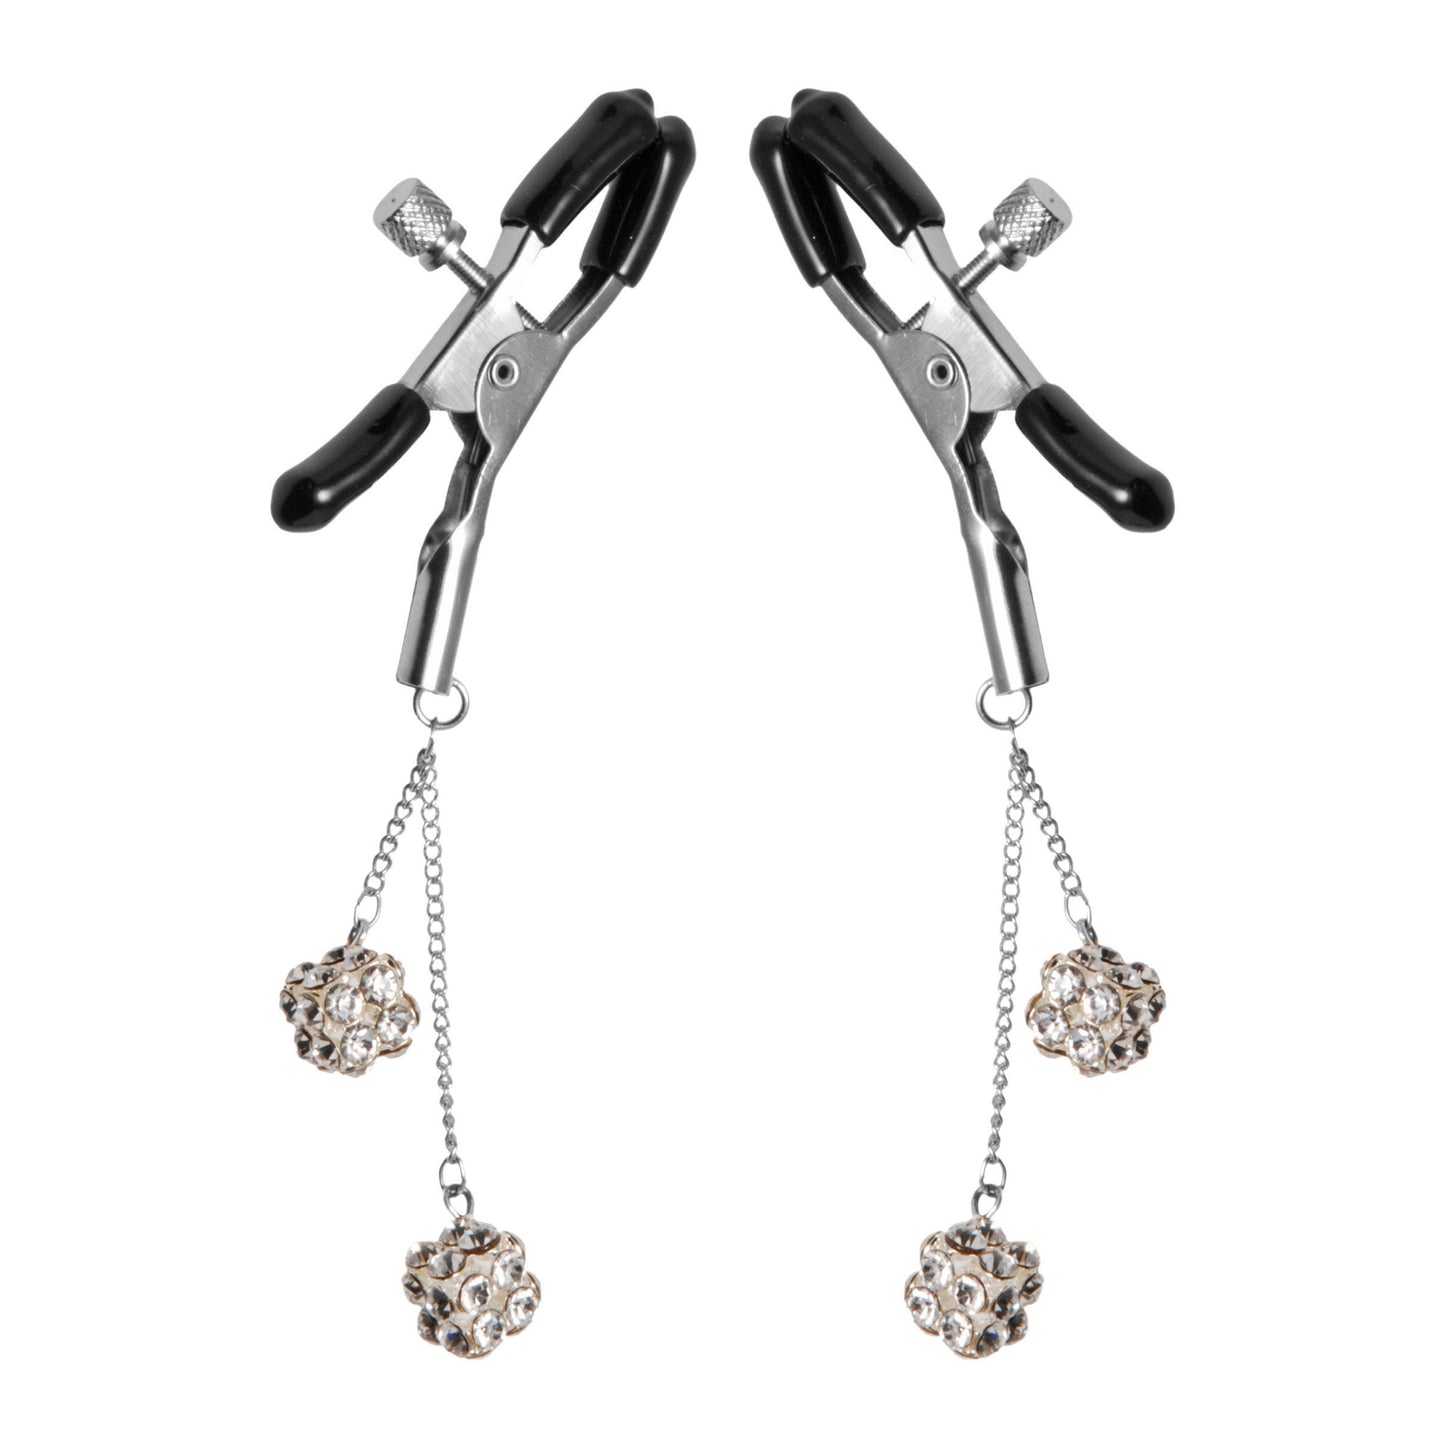 Ornament Adjustable Nipple Clamps with Jewel Accents - UABDSM